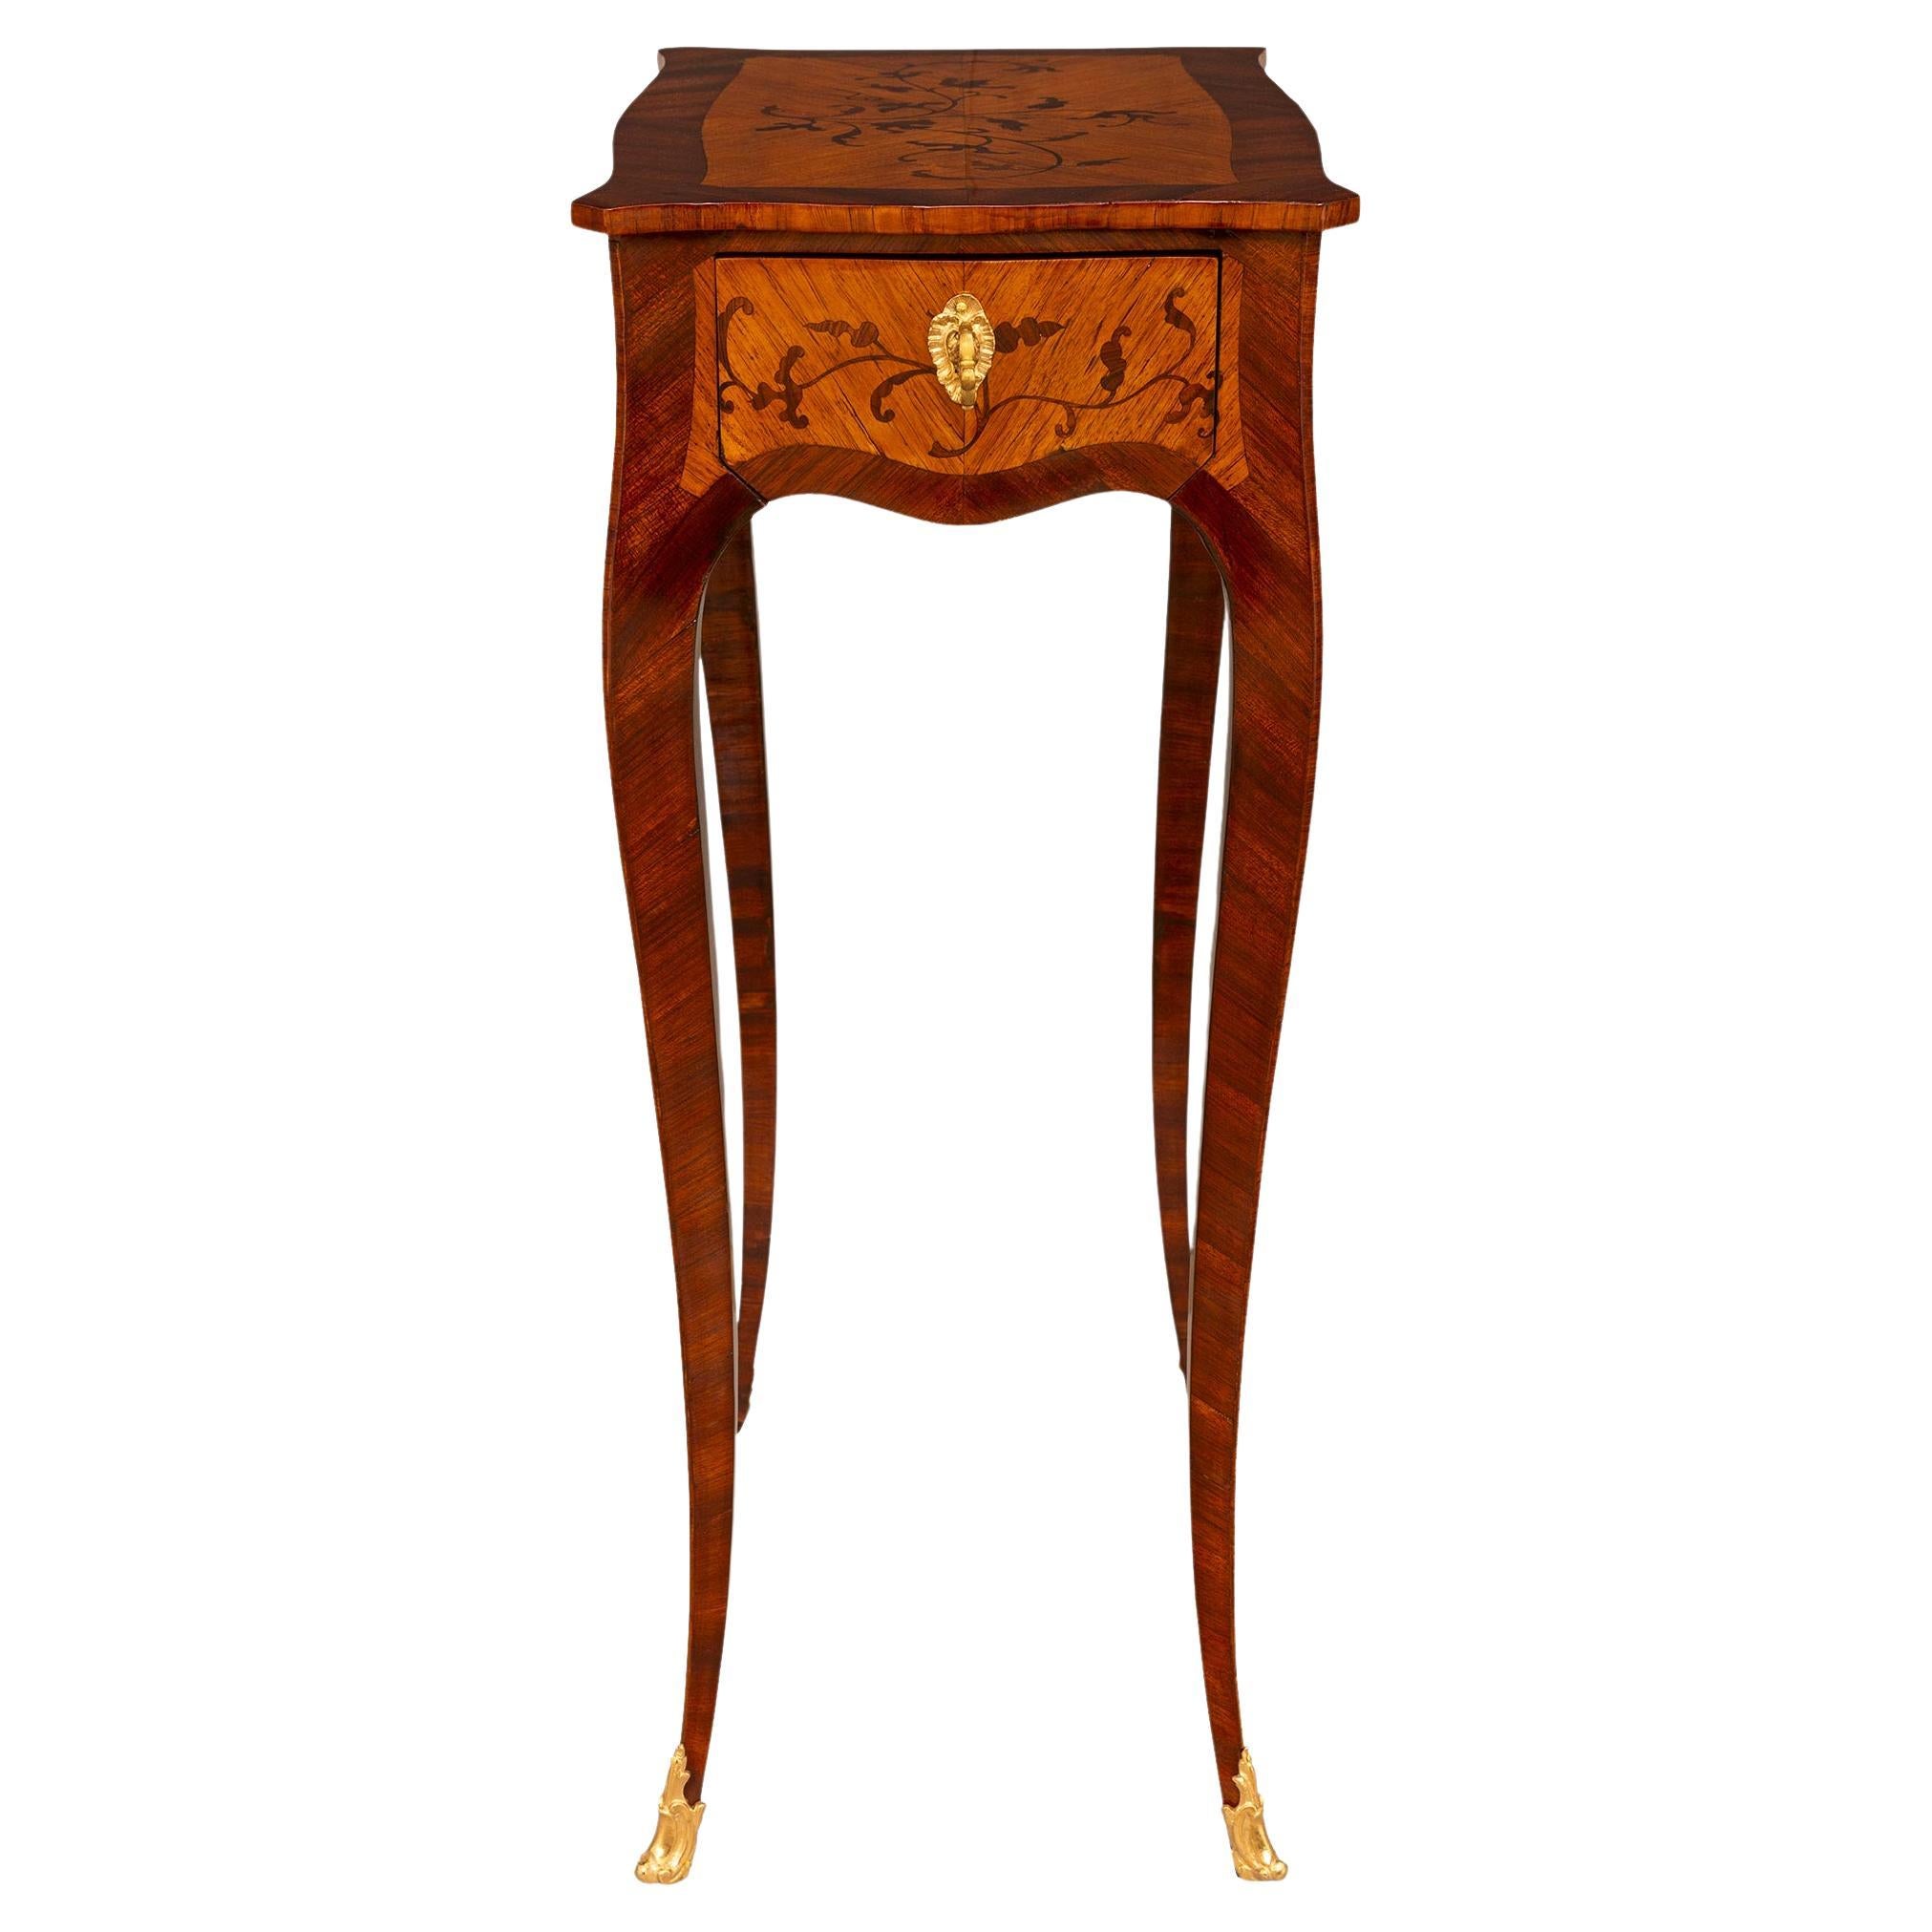 A French 19th century Louis XV st. Kingwood, Tulipwood and Ormolu side table